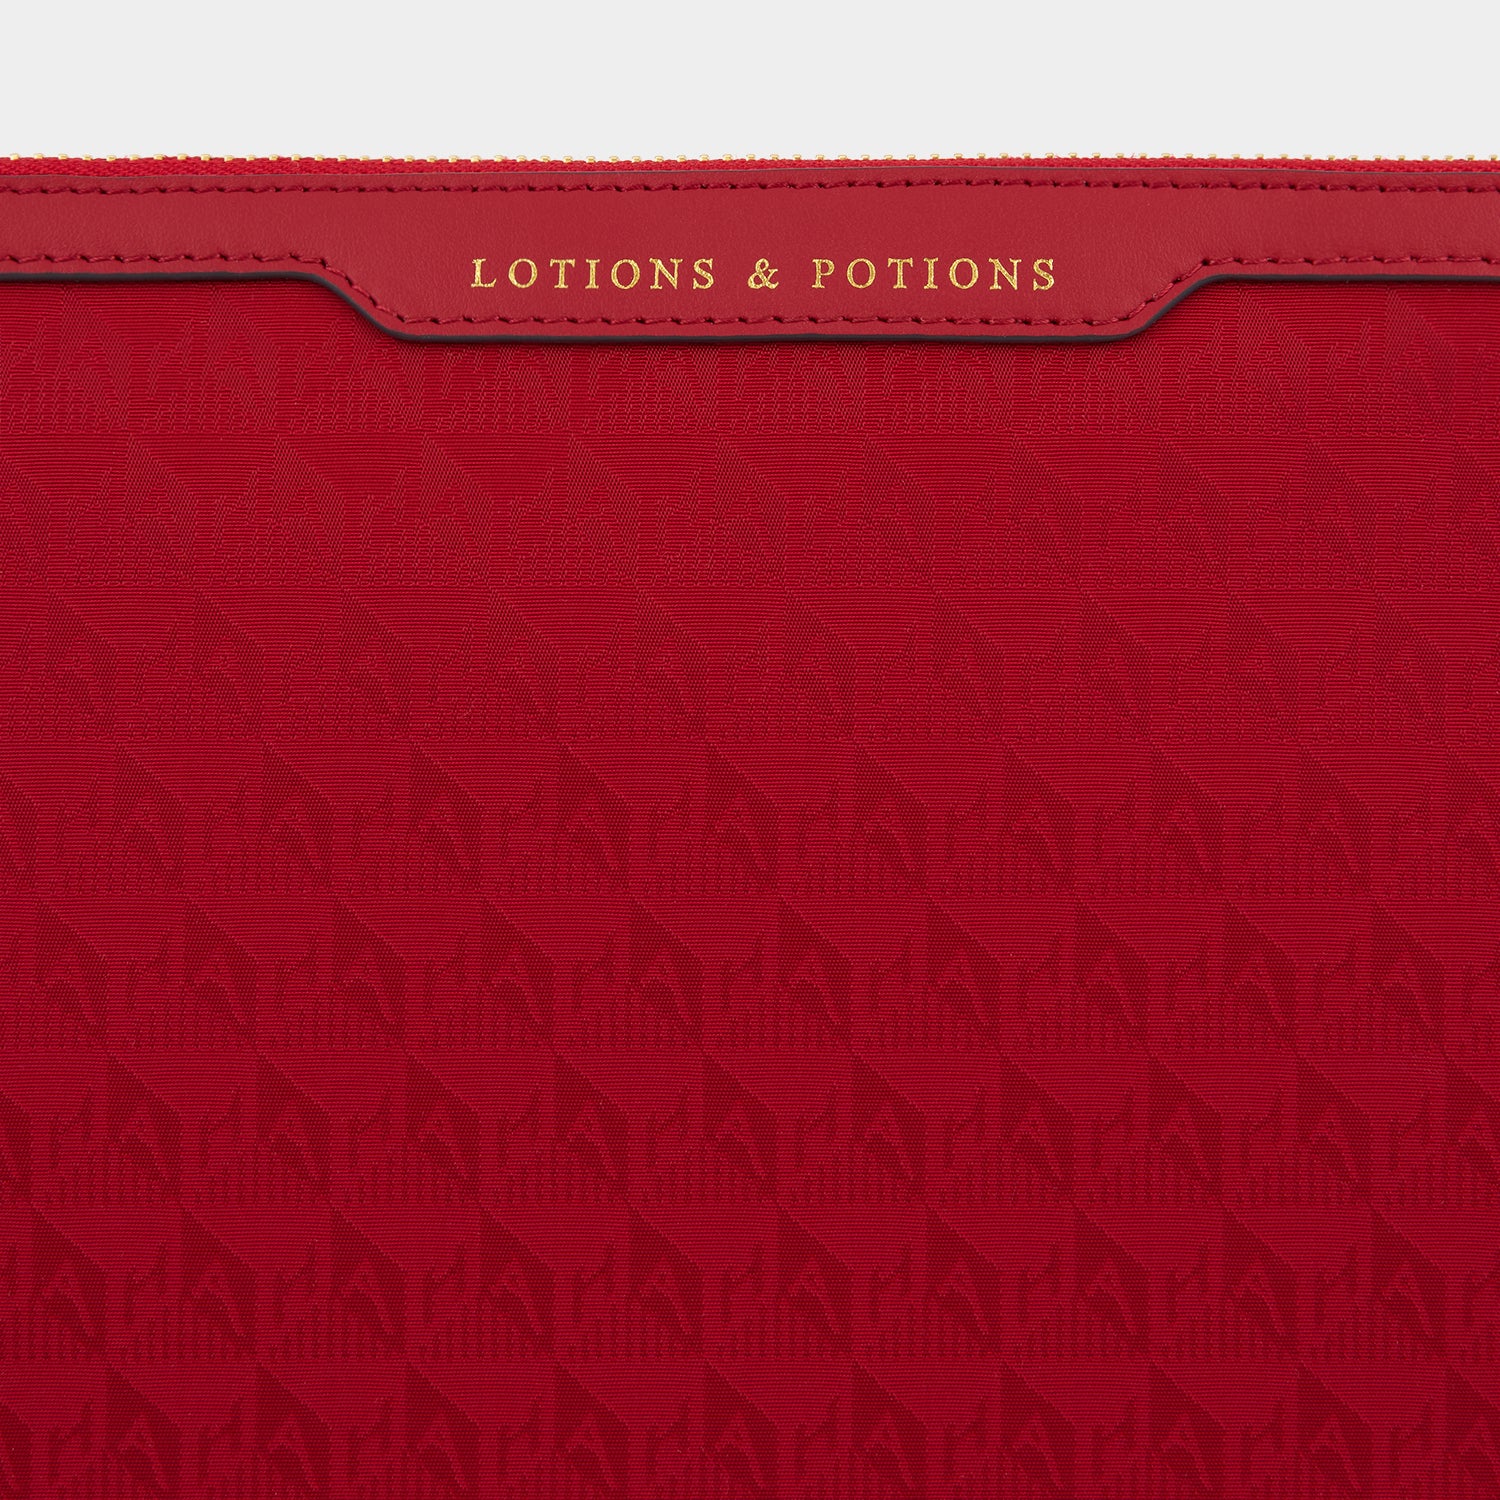 Logo Lotions and Potions Pouch -

                  
                    Jacquard Nylon Potions in Red -
                  

                  Anya Hindmarch UK
